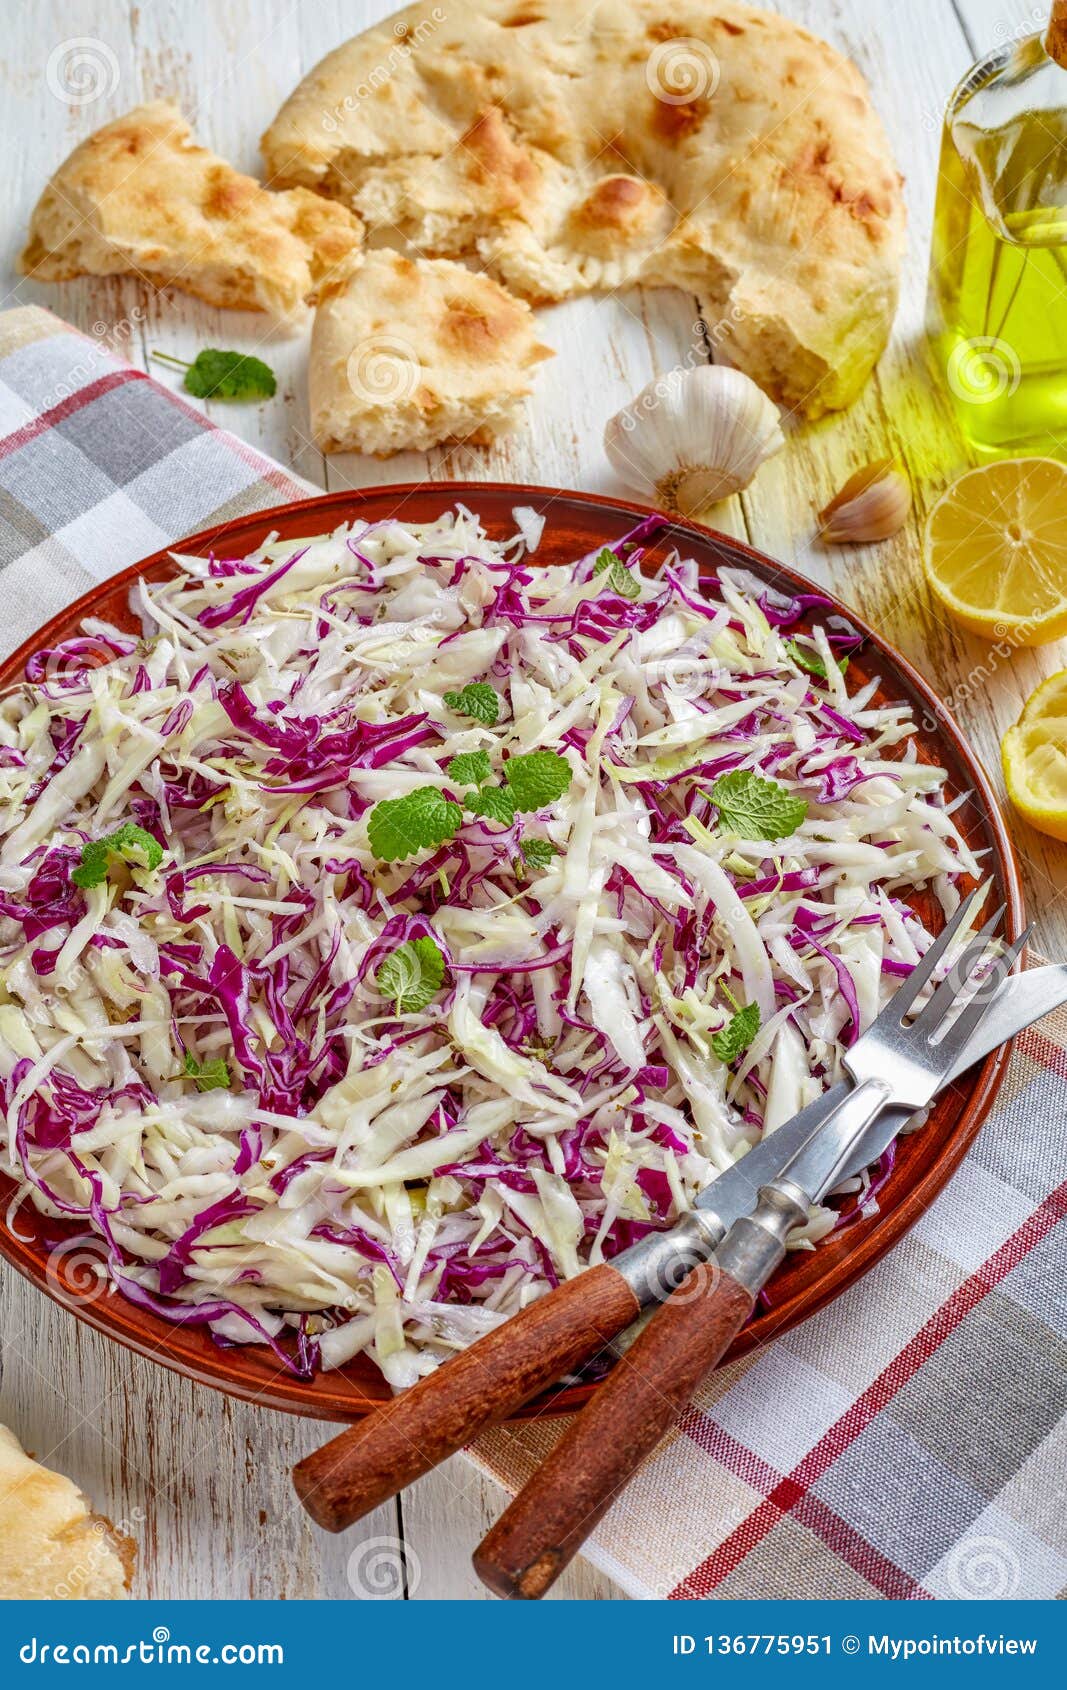 Lebanese Shredded Cabbage Salad on a Plate Stock Image - Image of ...